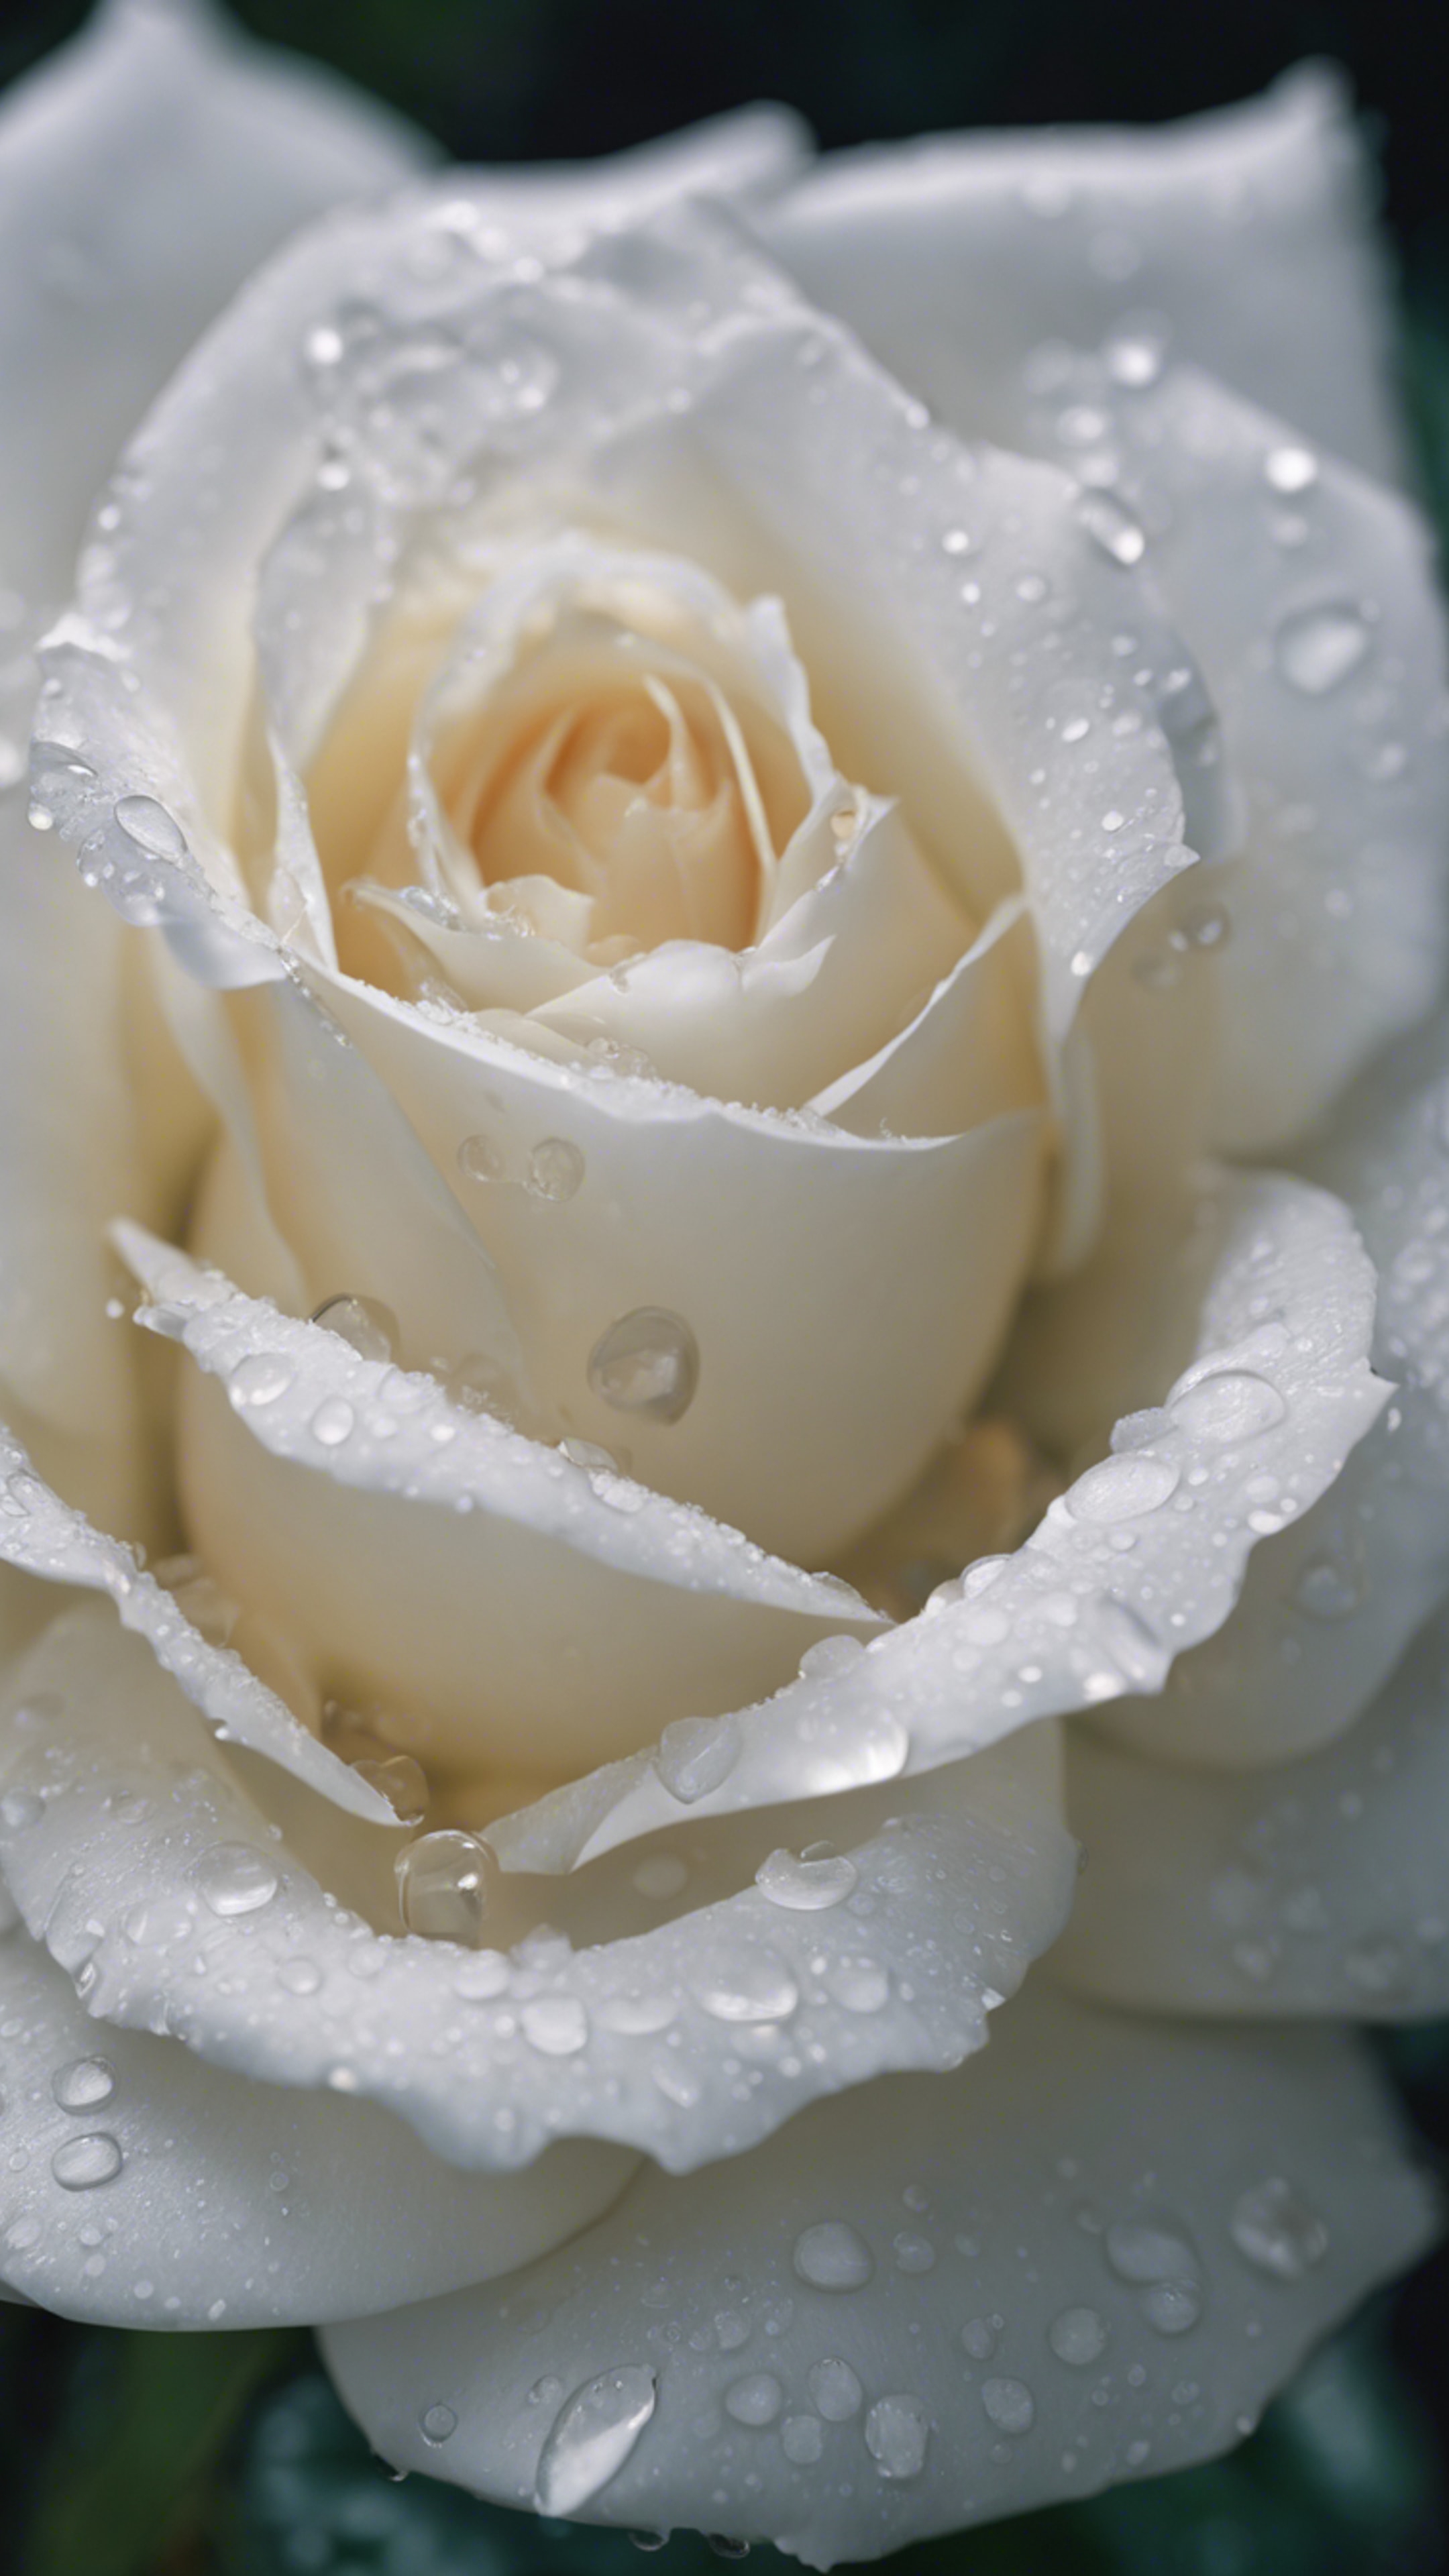 Close-up of a white rose in full bloom, a droplet of water hanging off one petal. Tapet[2daa22f287134494a68f]